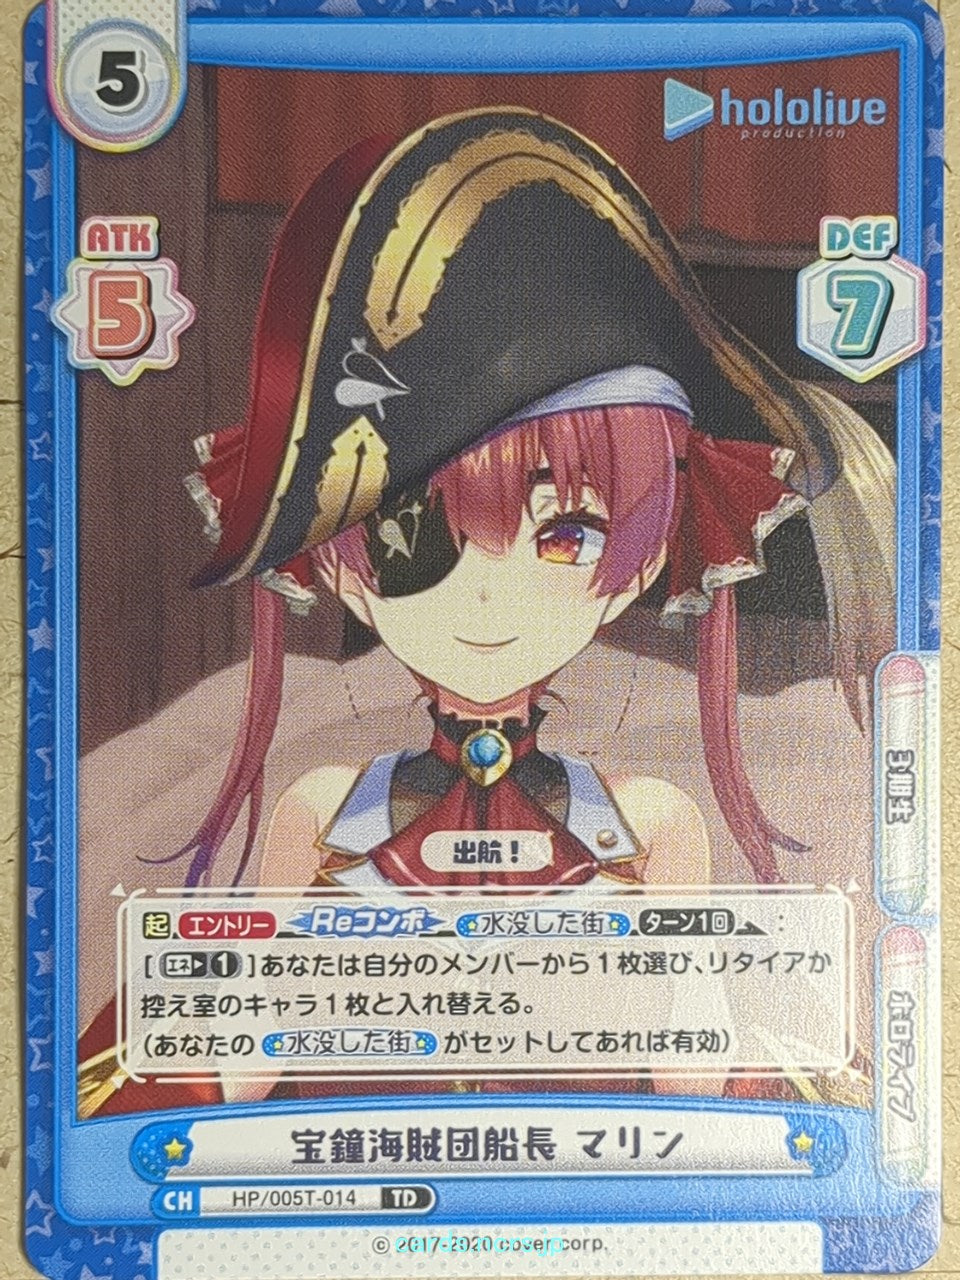 Re birth for you Hololive -Houshou Marine-   Trading Card RE/HP/005T-014